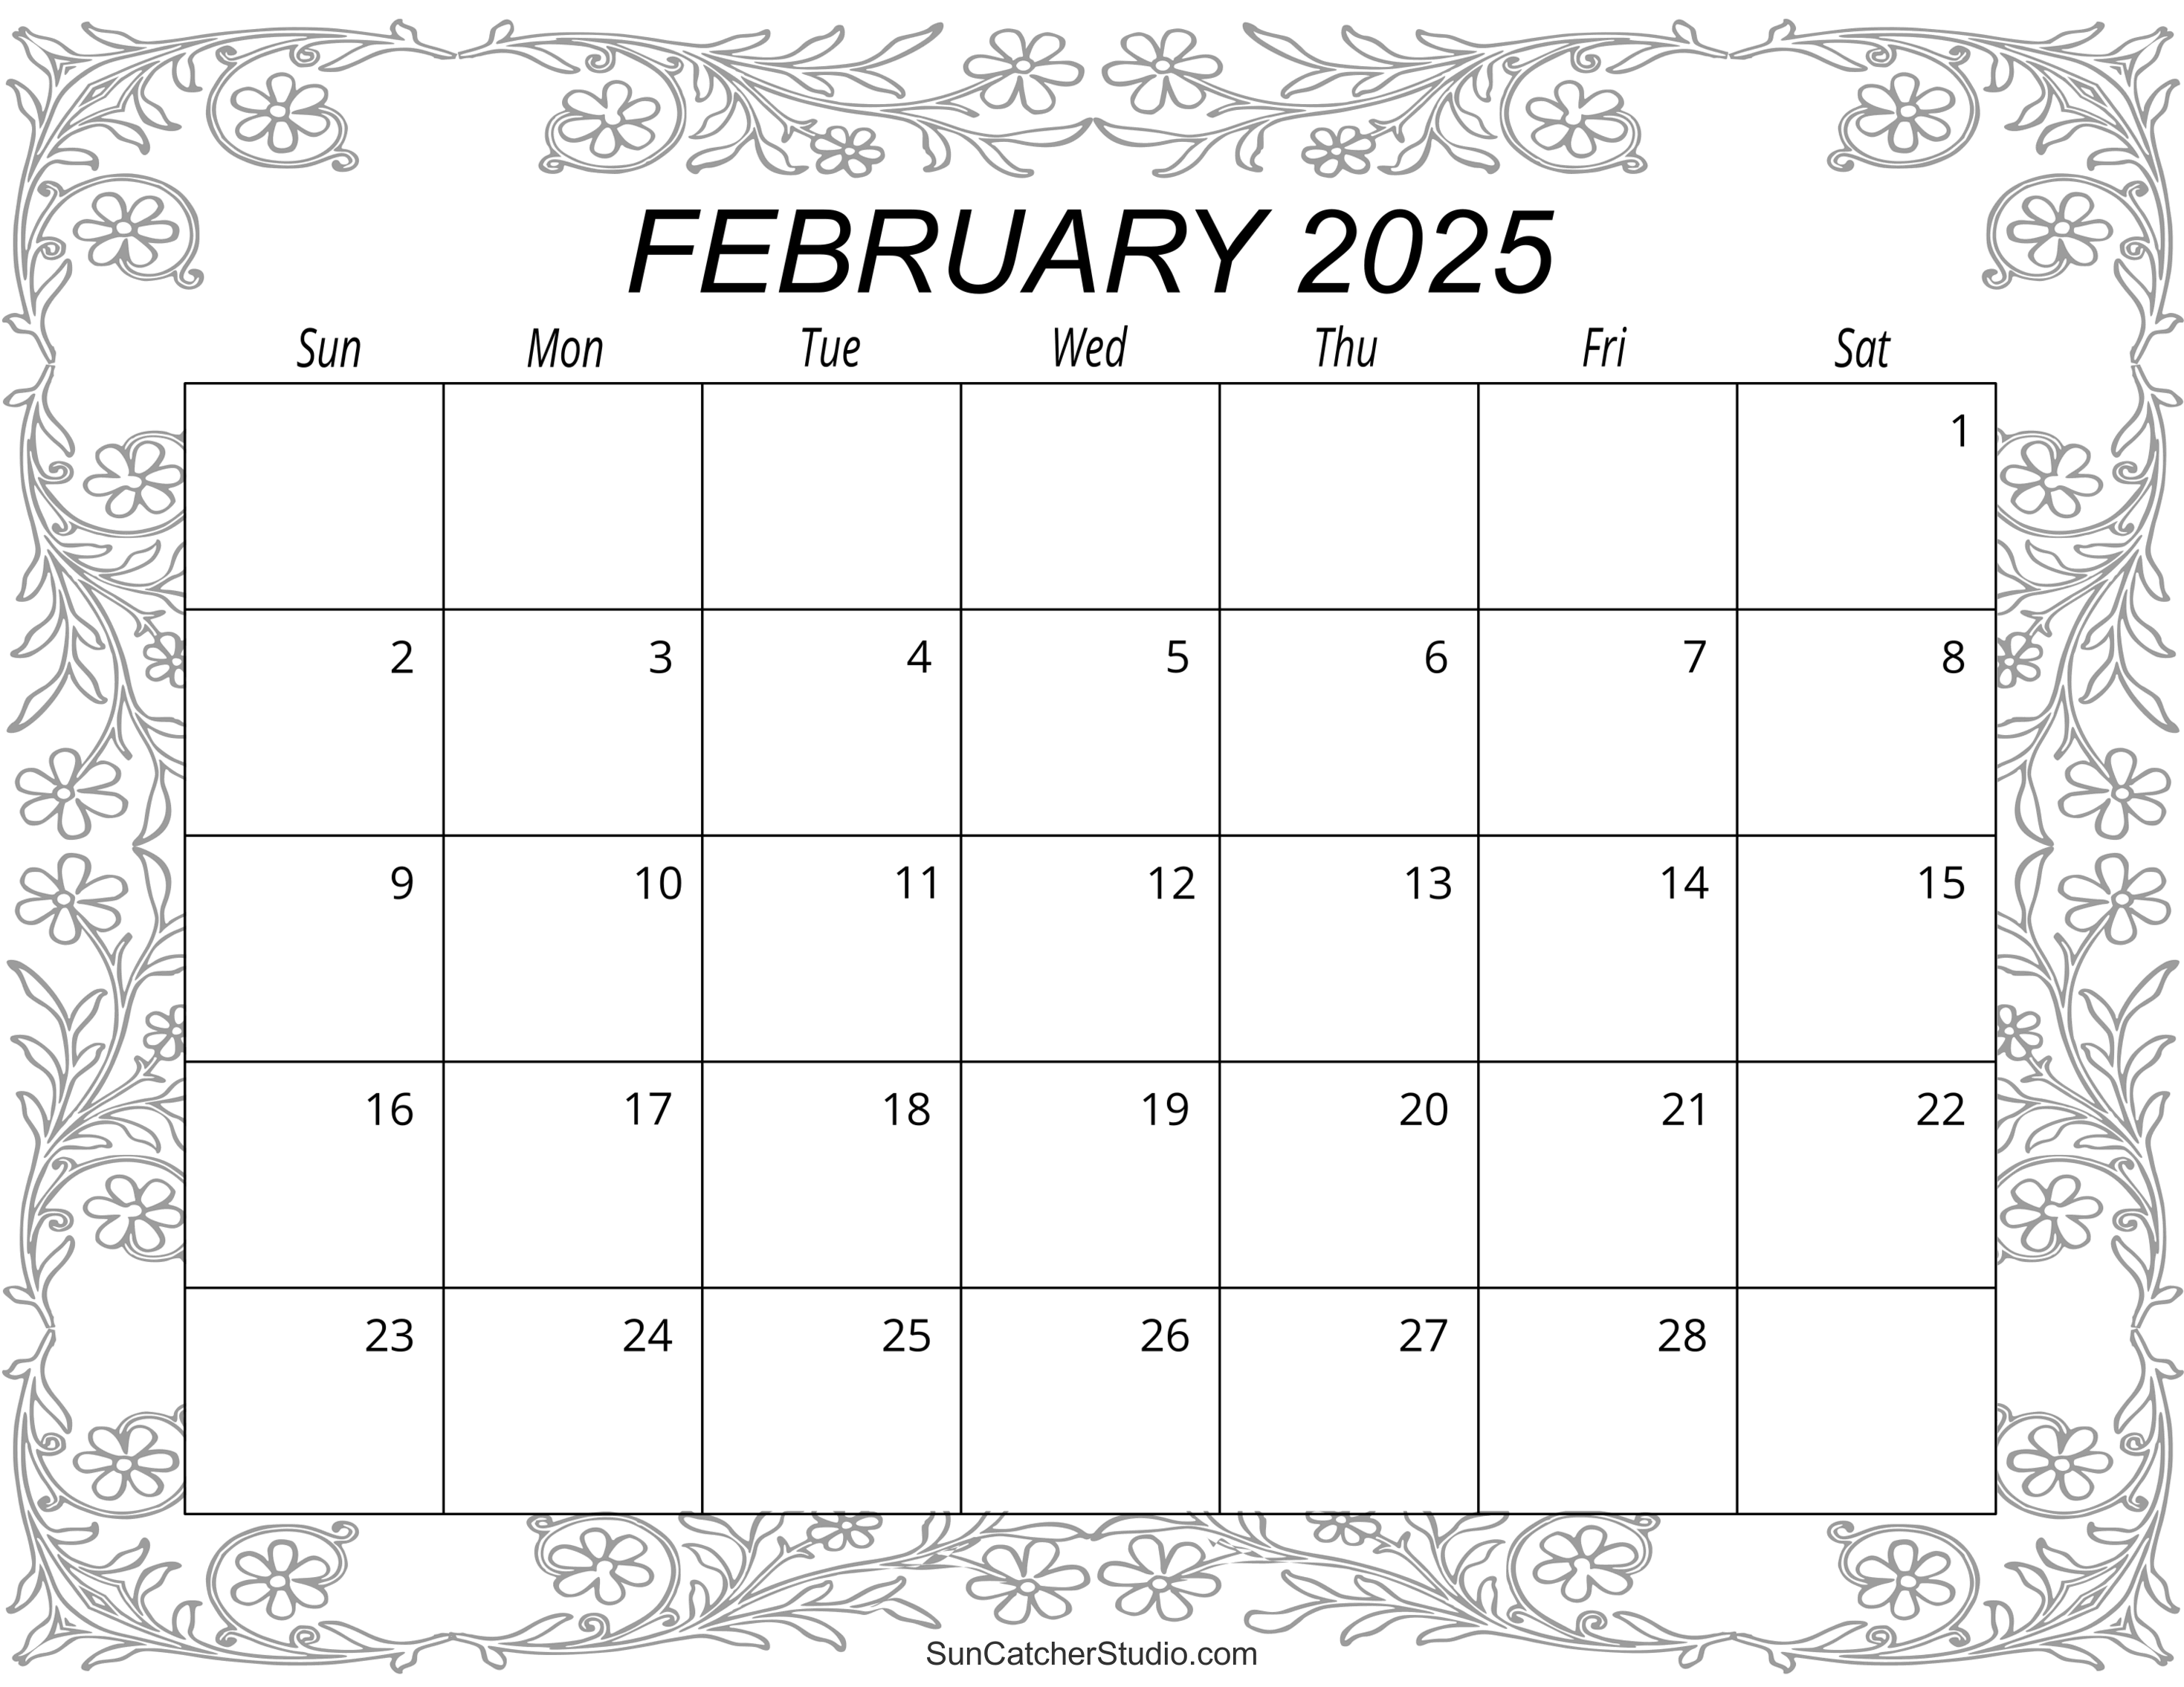 February 2025 Calendar (Free Printable) DIY Projects, Patterns